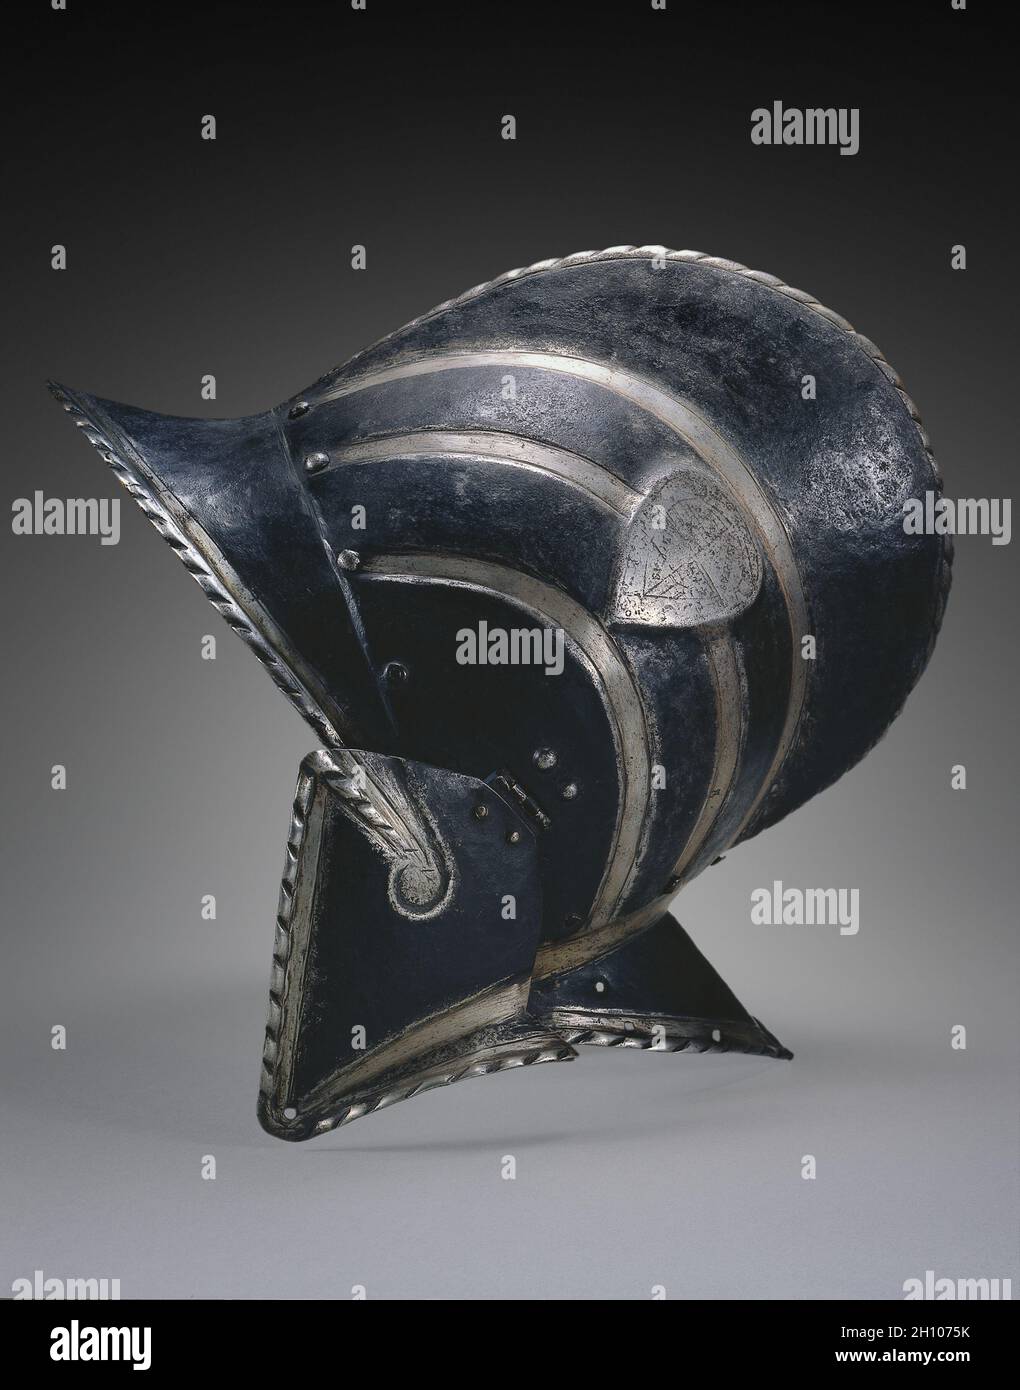 Black and White Burgonet (of the Civic Guard of Bologna), c. 1580-1600. Italy, late 16th Century. Steel with black paint; overall: 31.8 x 35.6 x 19 cm (12 1/2 x 14 x 7 1/2 in.). Stock Photo